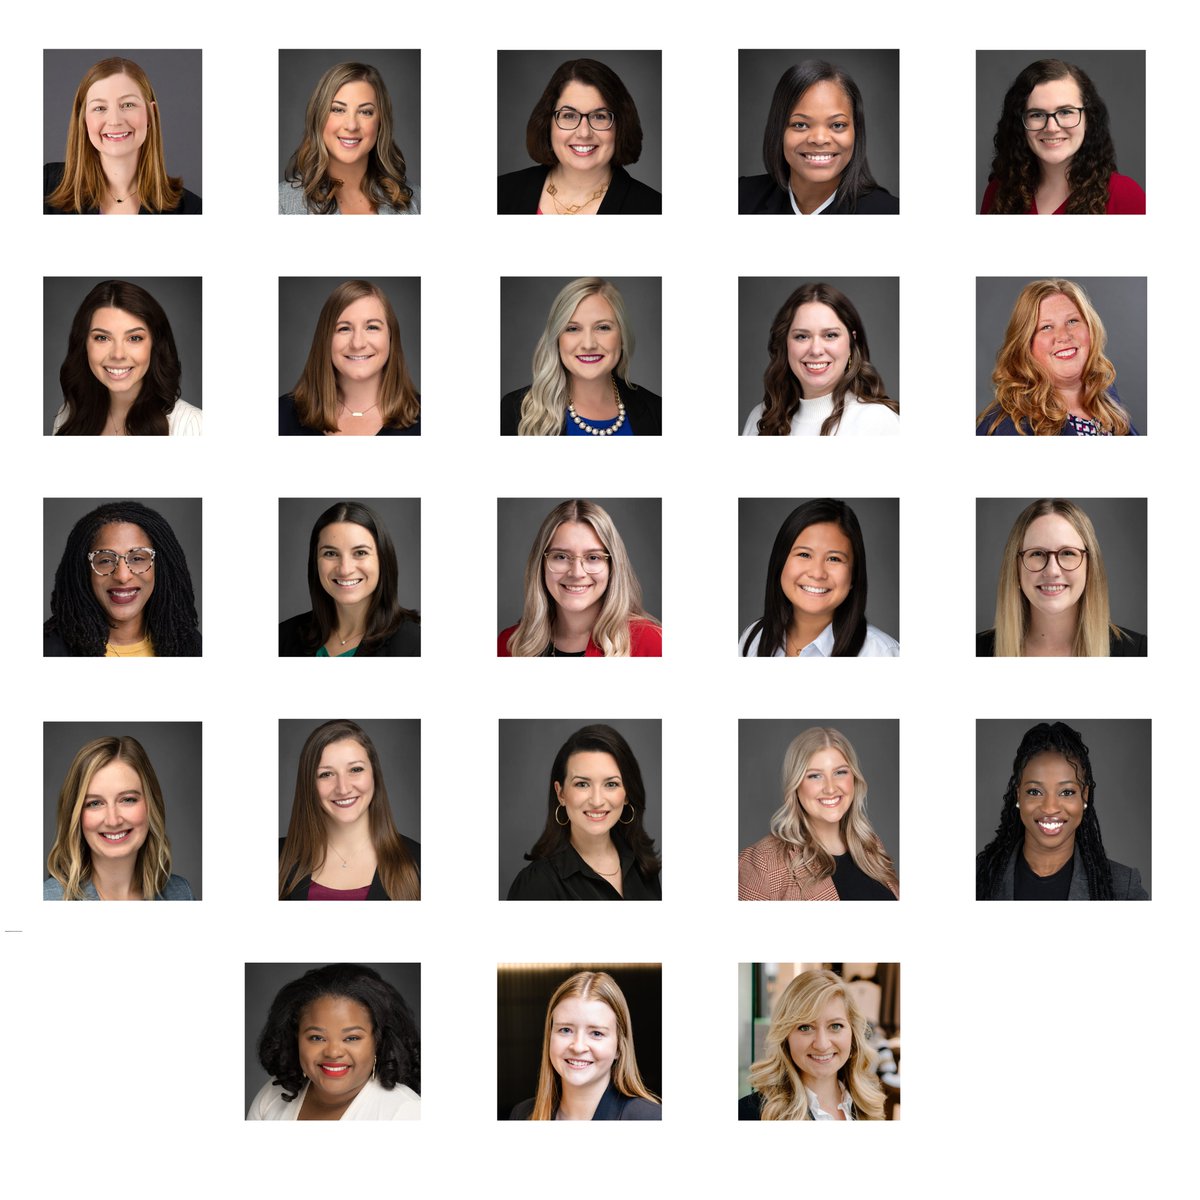 Today, and every day, we raise a glass to the amazing women on our team who work to make a difference in our community. We appreciate the work you do! ❤️#InternationalWomensDay